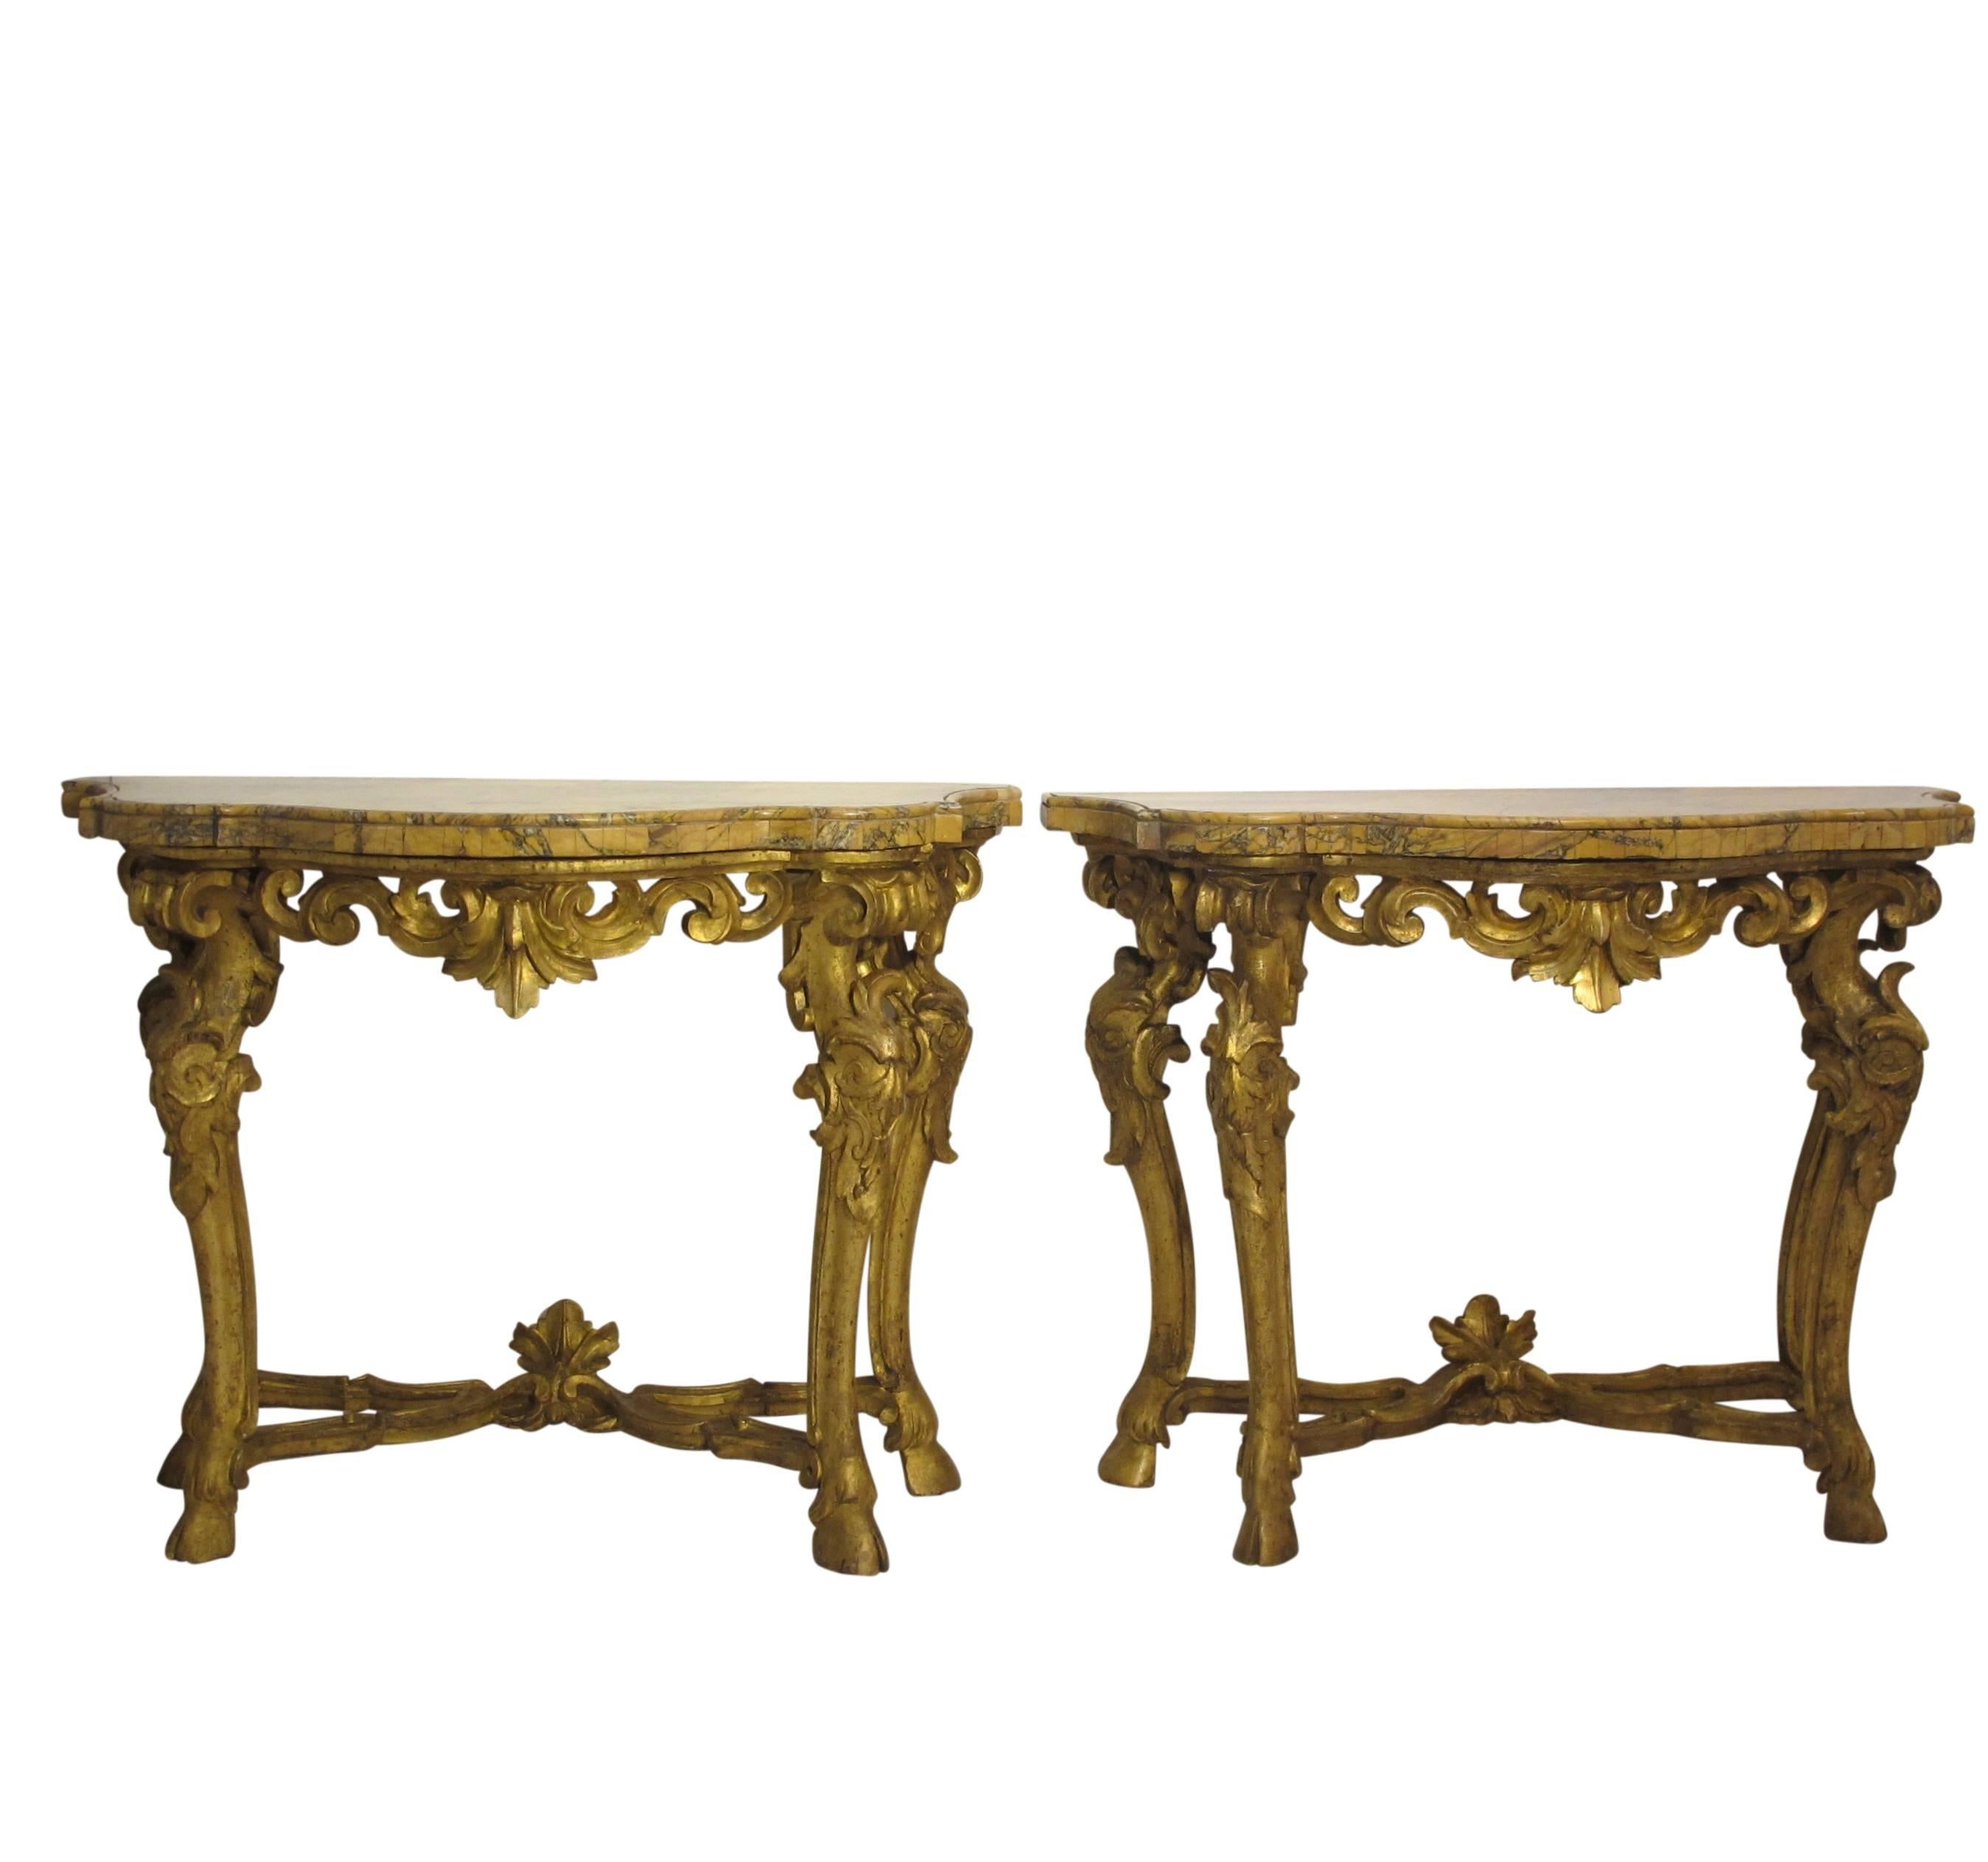 Pair of Carved & Gilt Console Tables with Breche Marble Tops Italian, circa 1780 For Sale 4